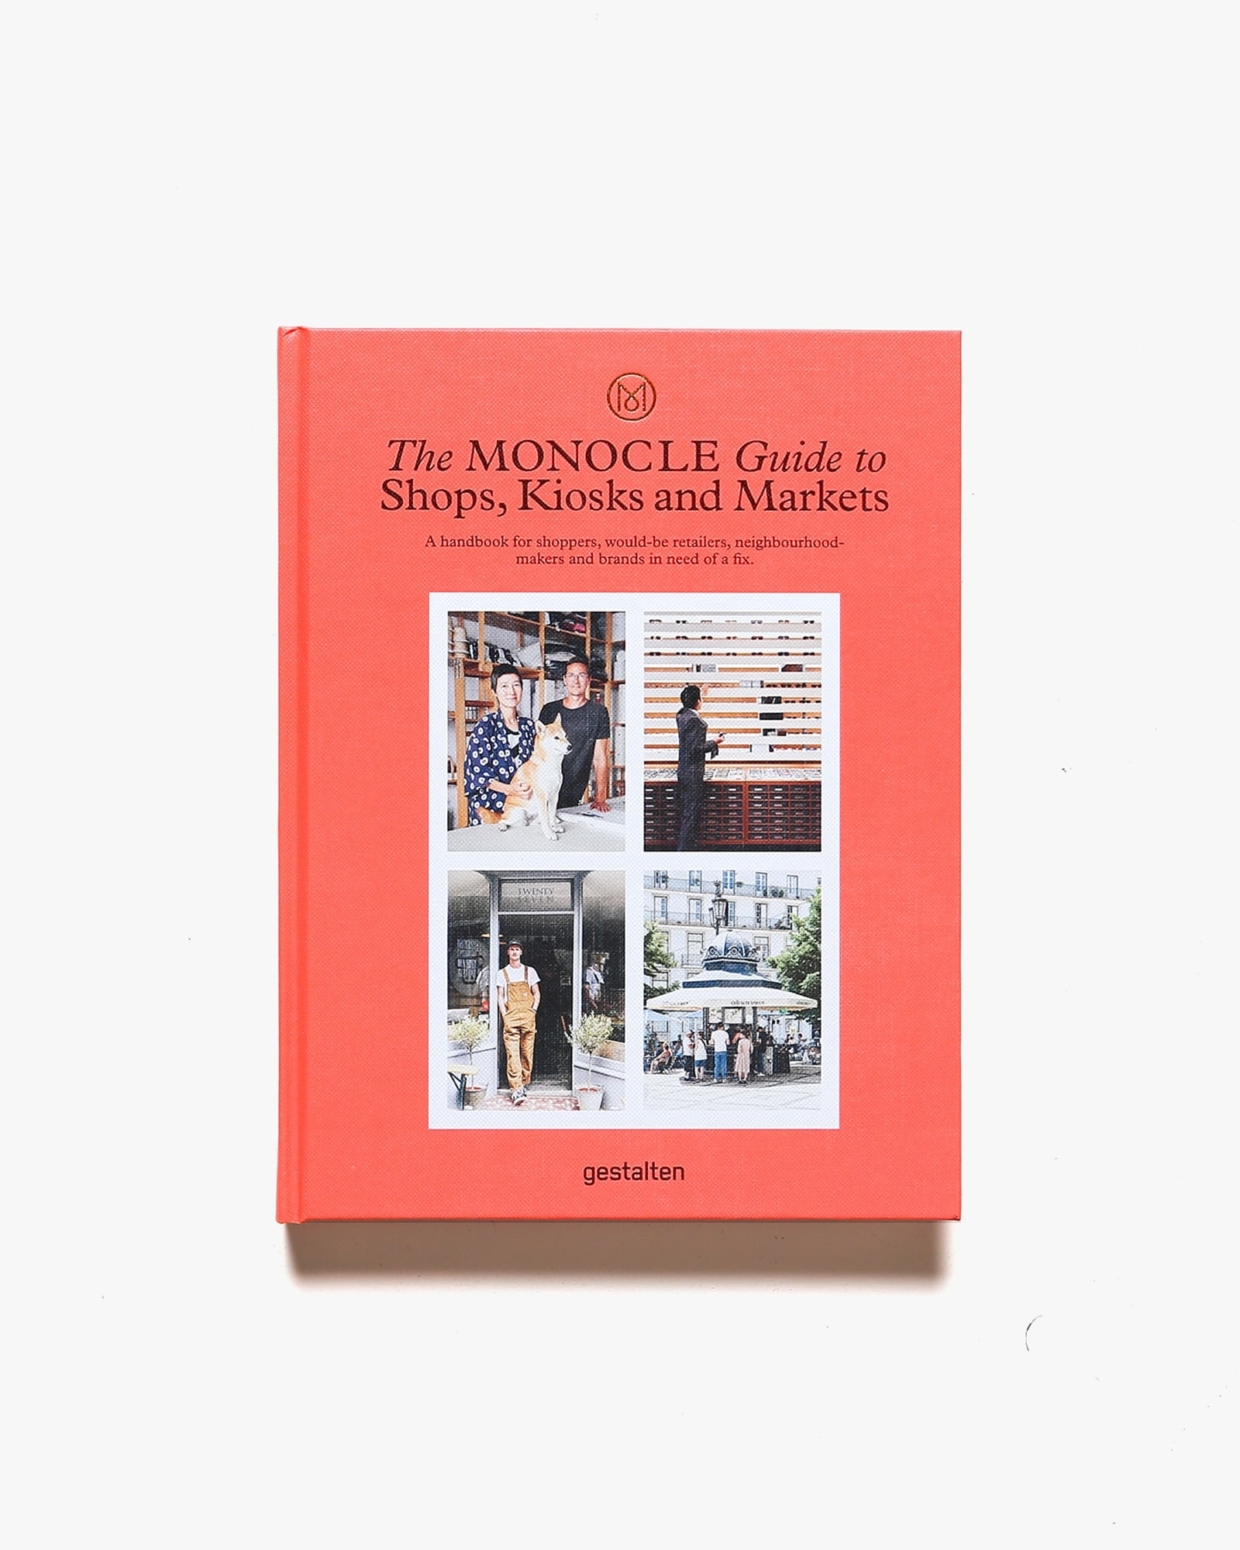 The Monocle Guide to Shops, Kiosks and Markets | Die Gestalten Verlag